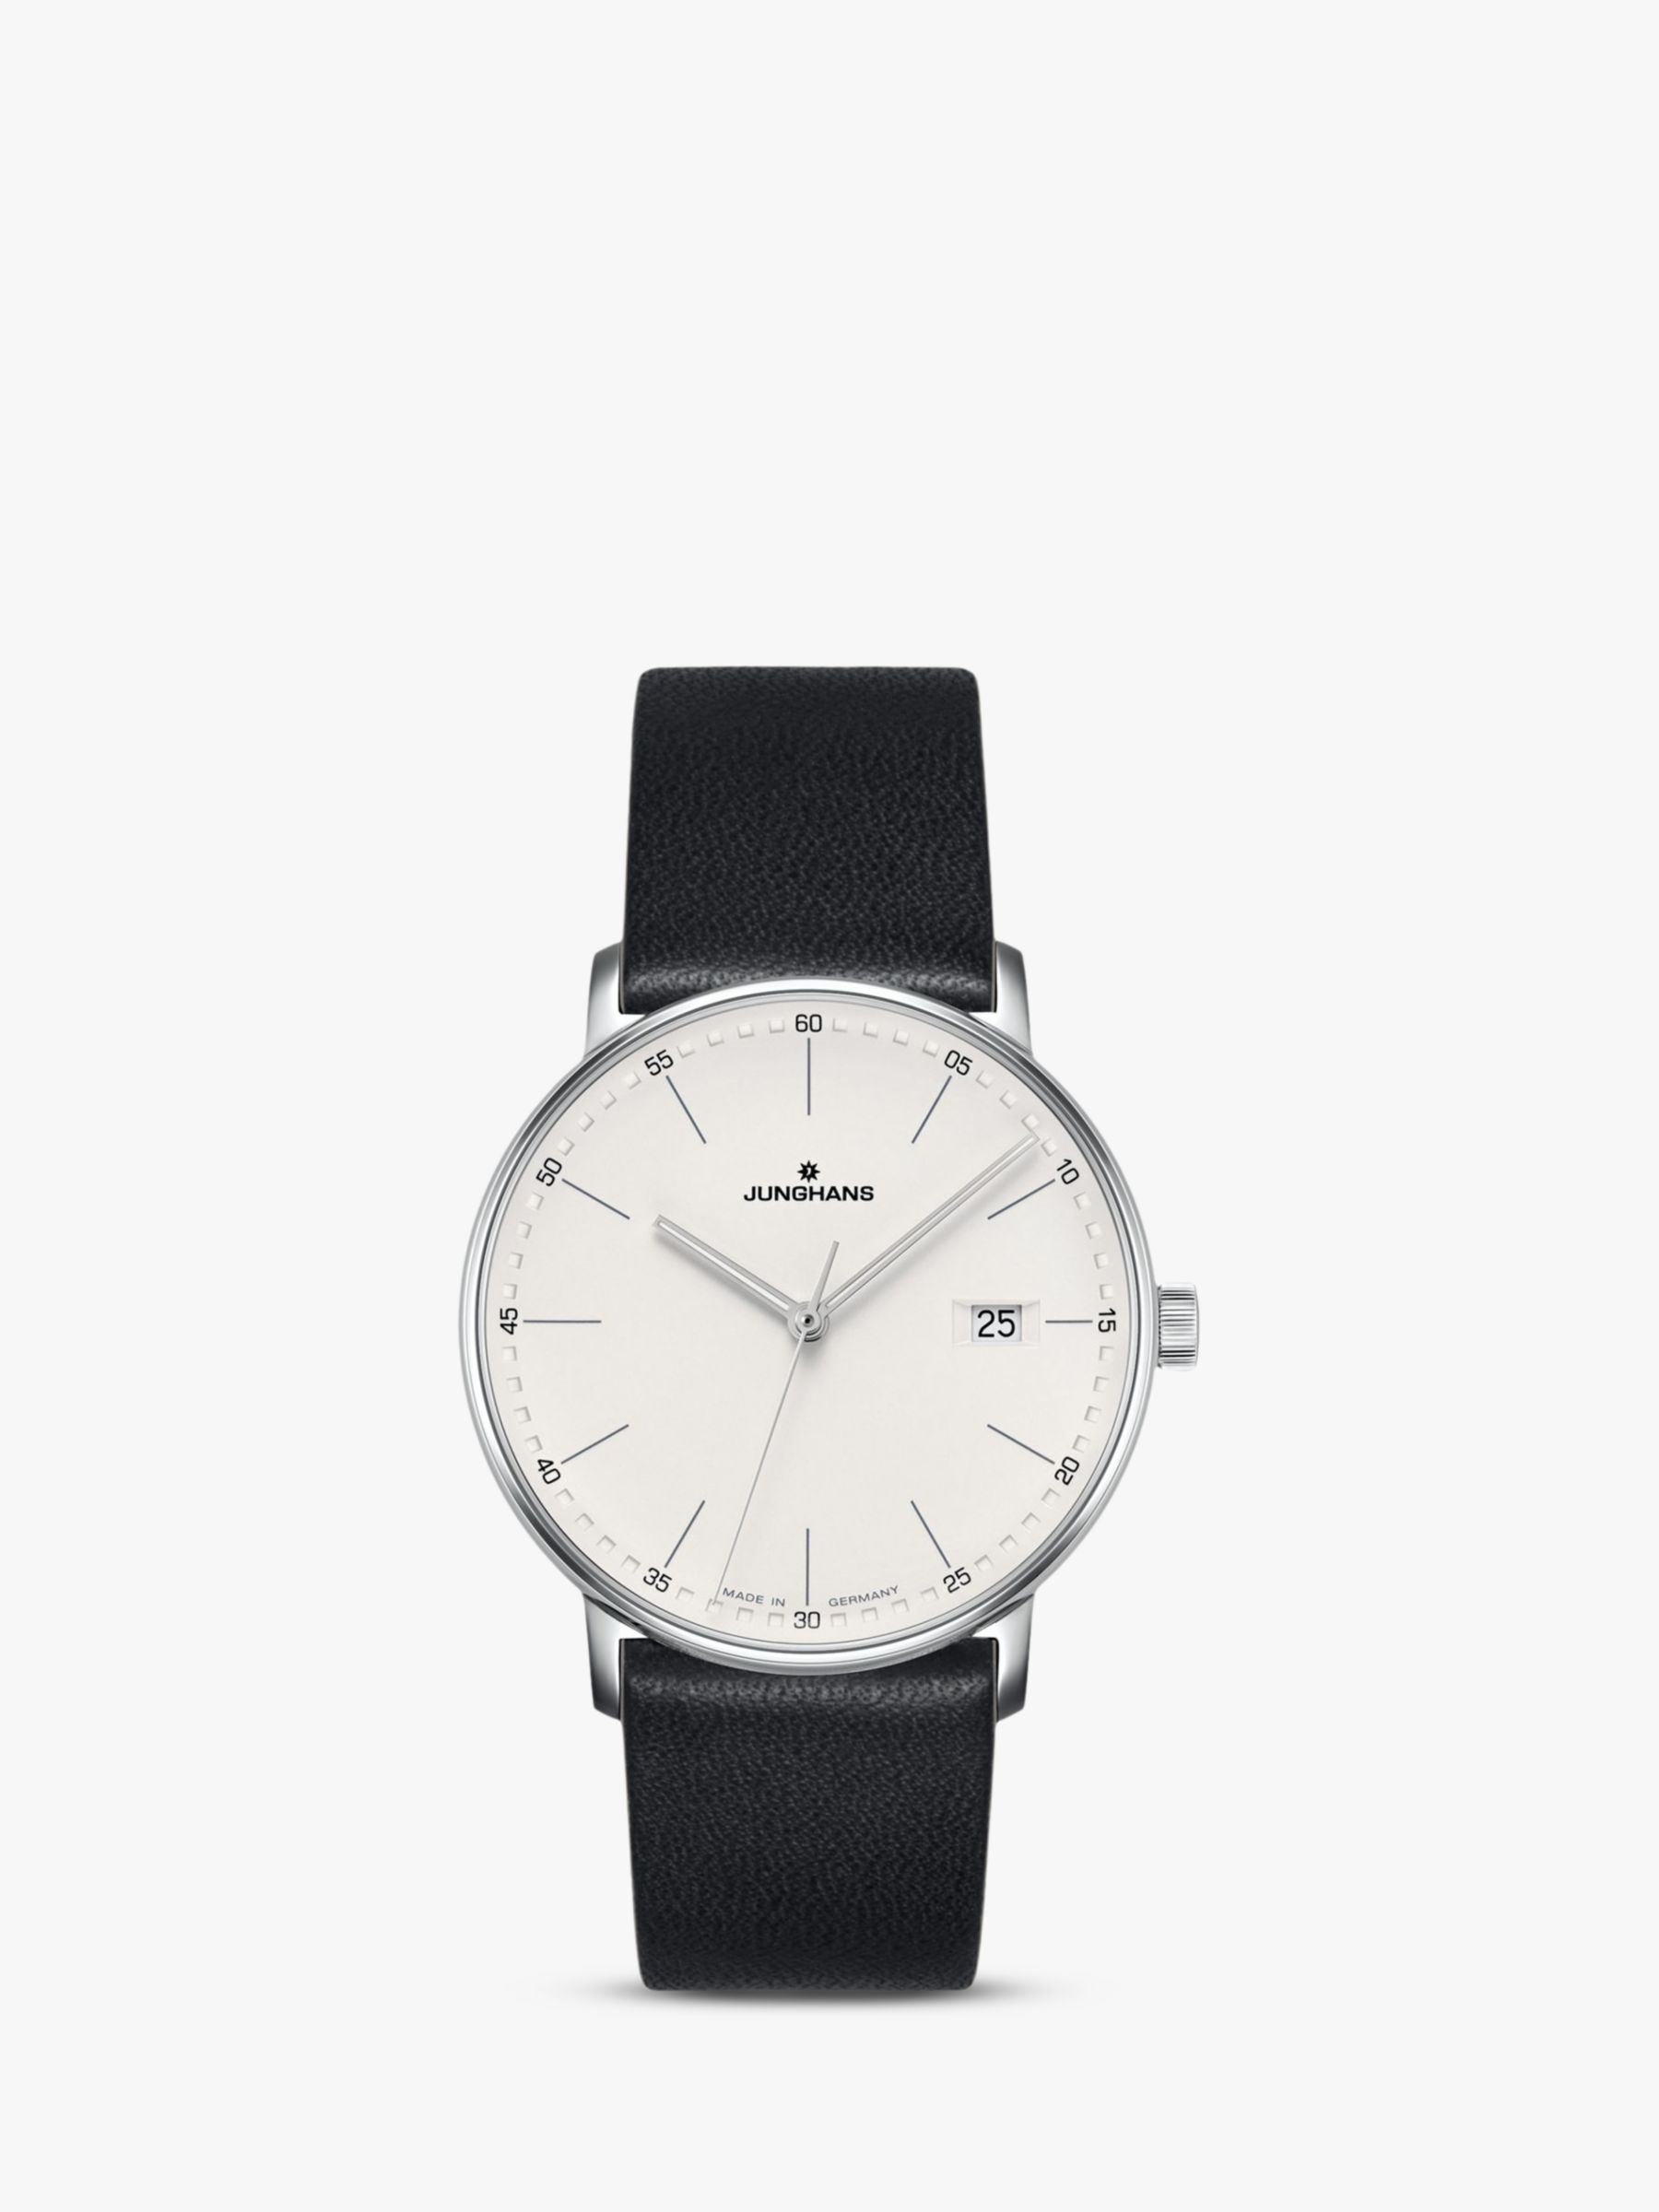 Junghans 041/4884.00 Unisex Form Date Leather Strap Watch, Black/White at John Lewis & Partners